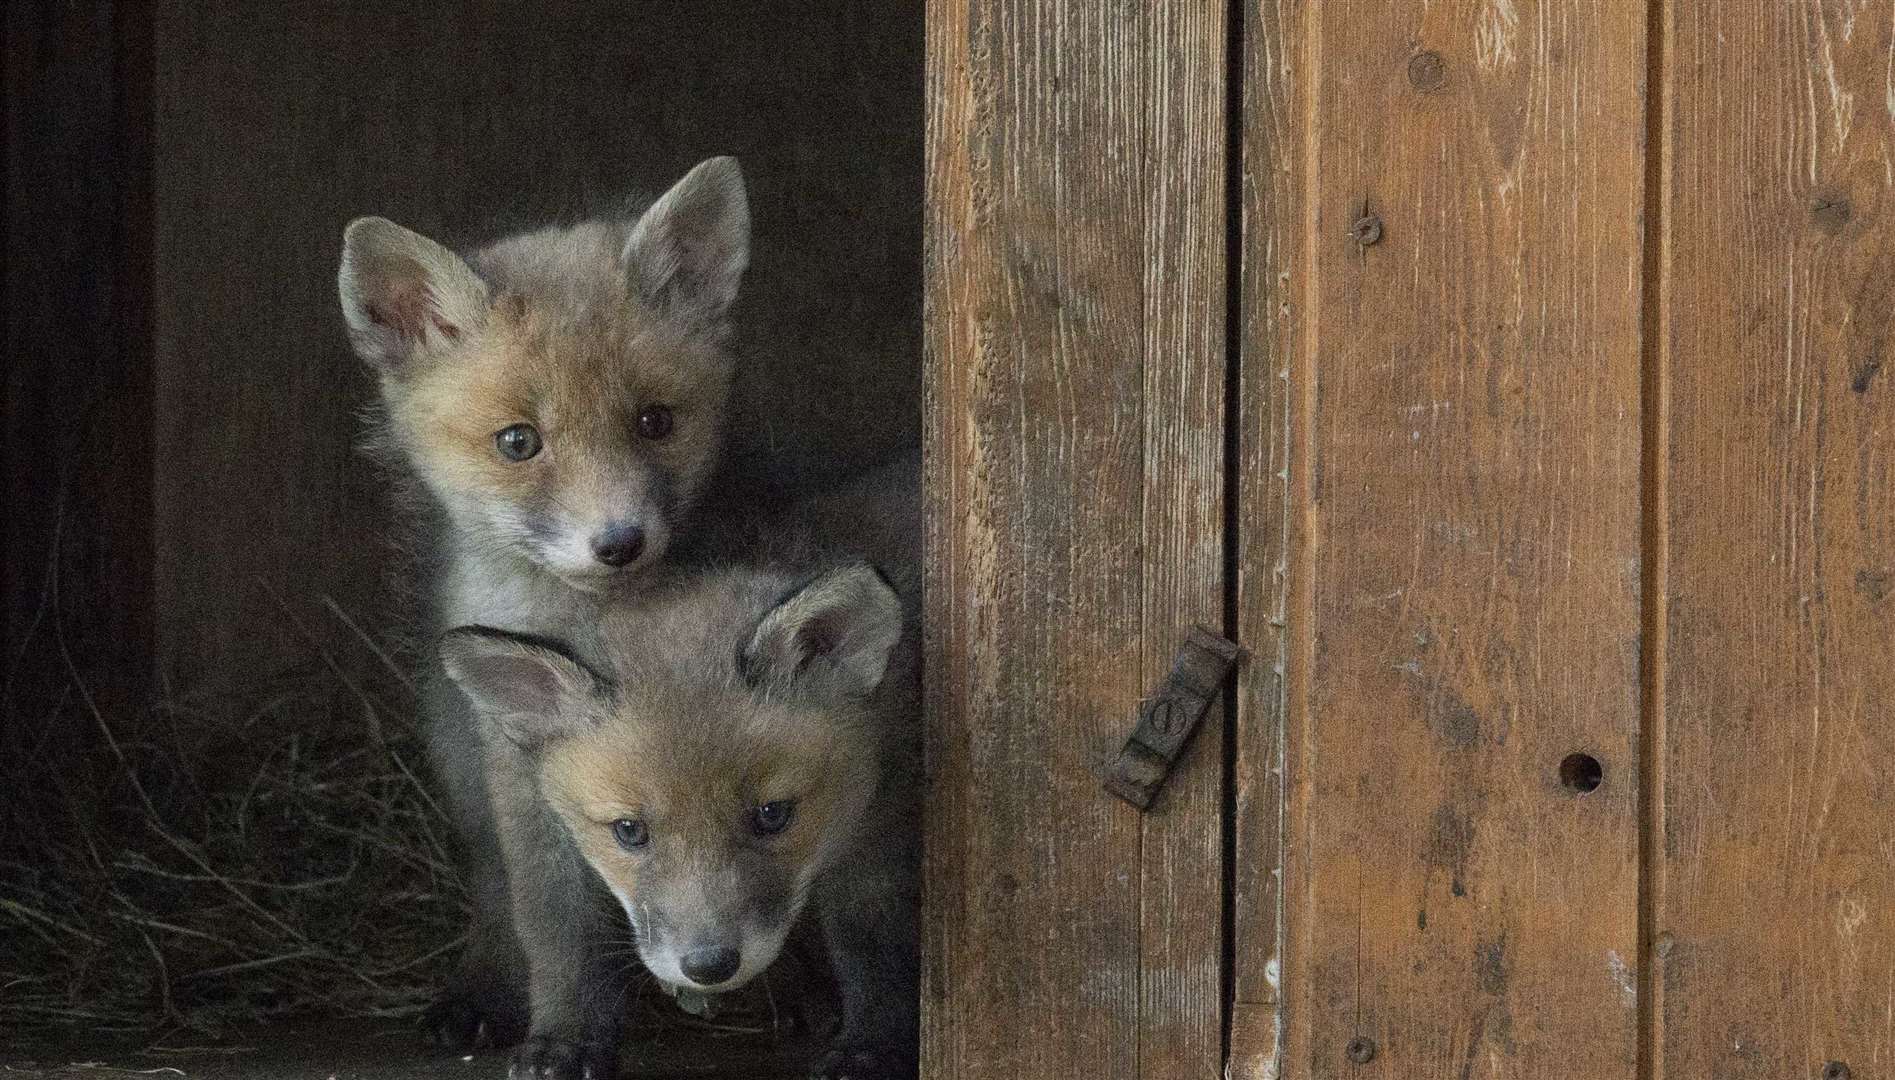 The wildlife charity has bases in Pembury and Paddock Wood. Picture: The Fox Project